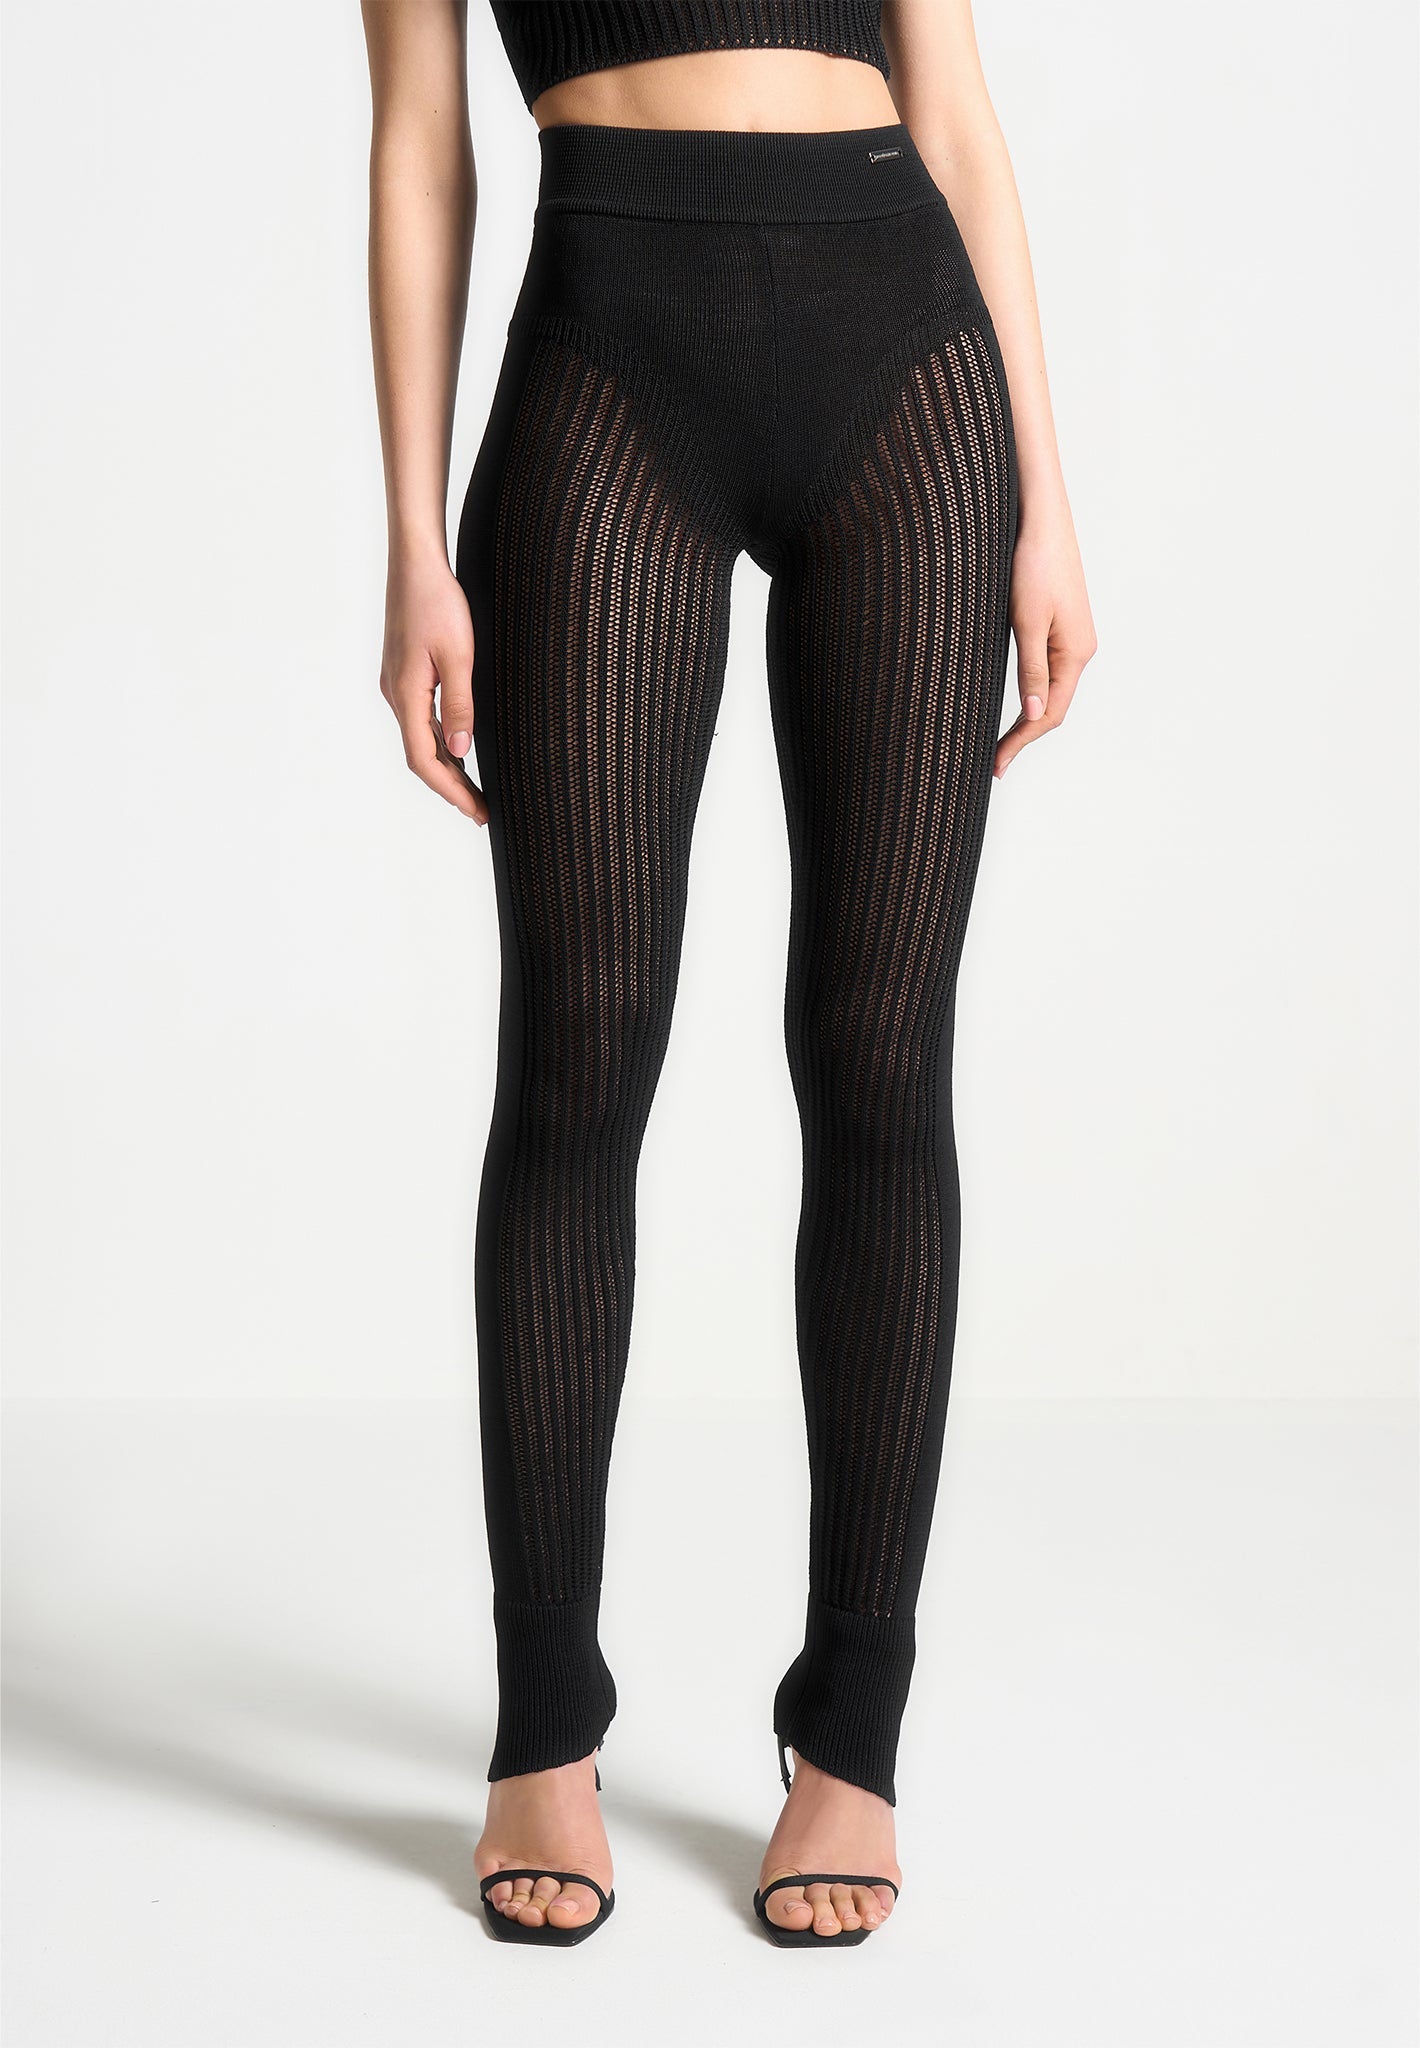 Shop Tape Detail 3/4 Length Leggings with Elasticised Waistband Online